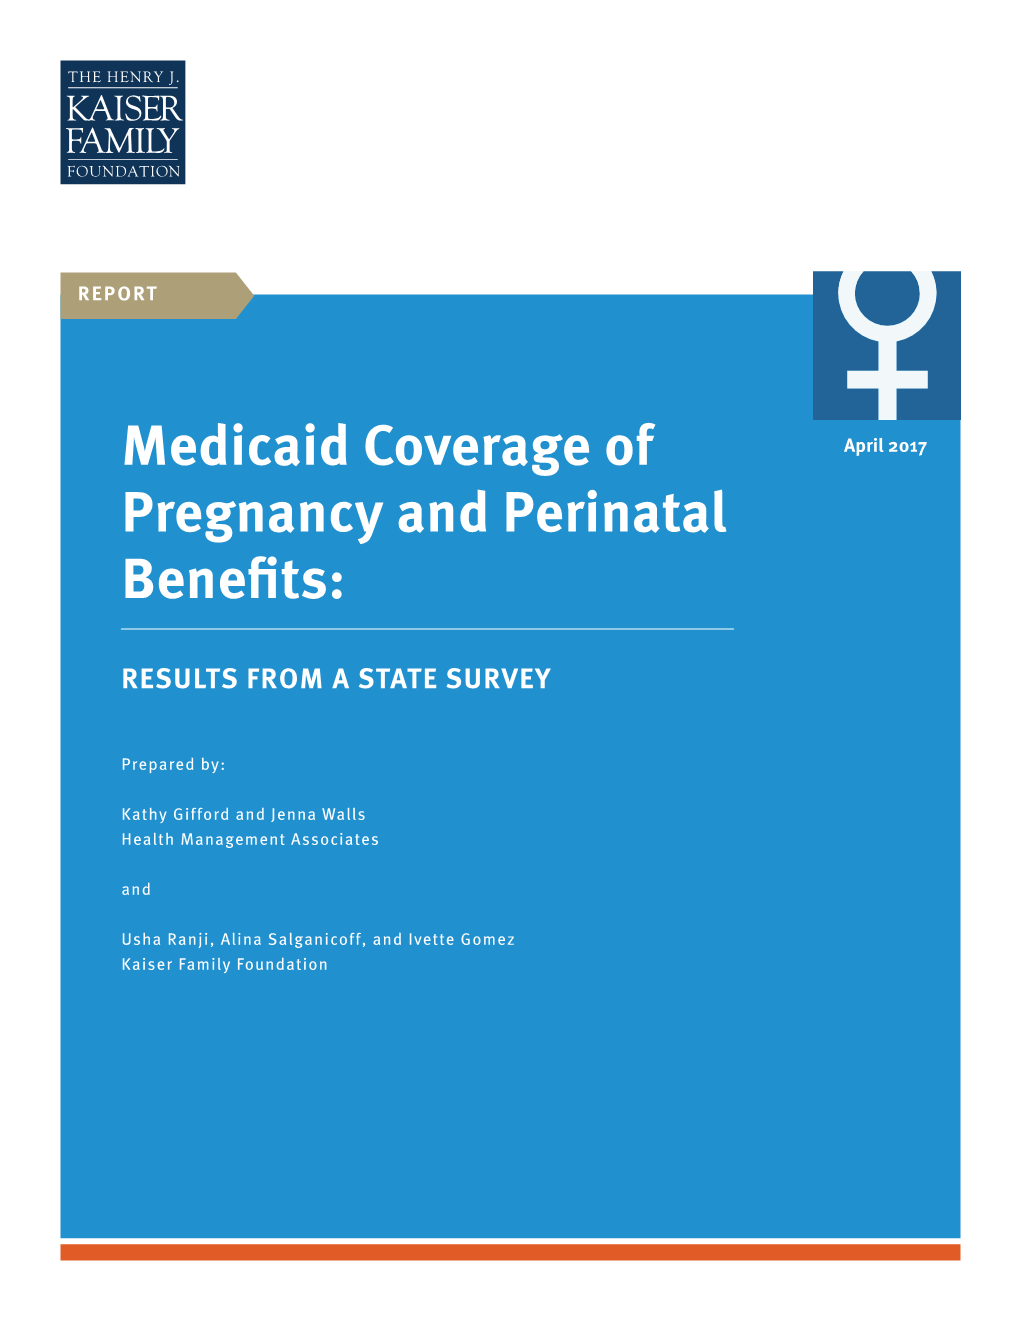 Medicaid Coverage of Pregnancy and Perinatal Benefits: Results from a State Survey